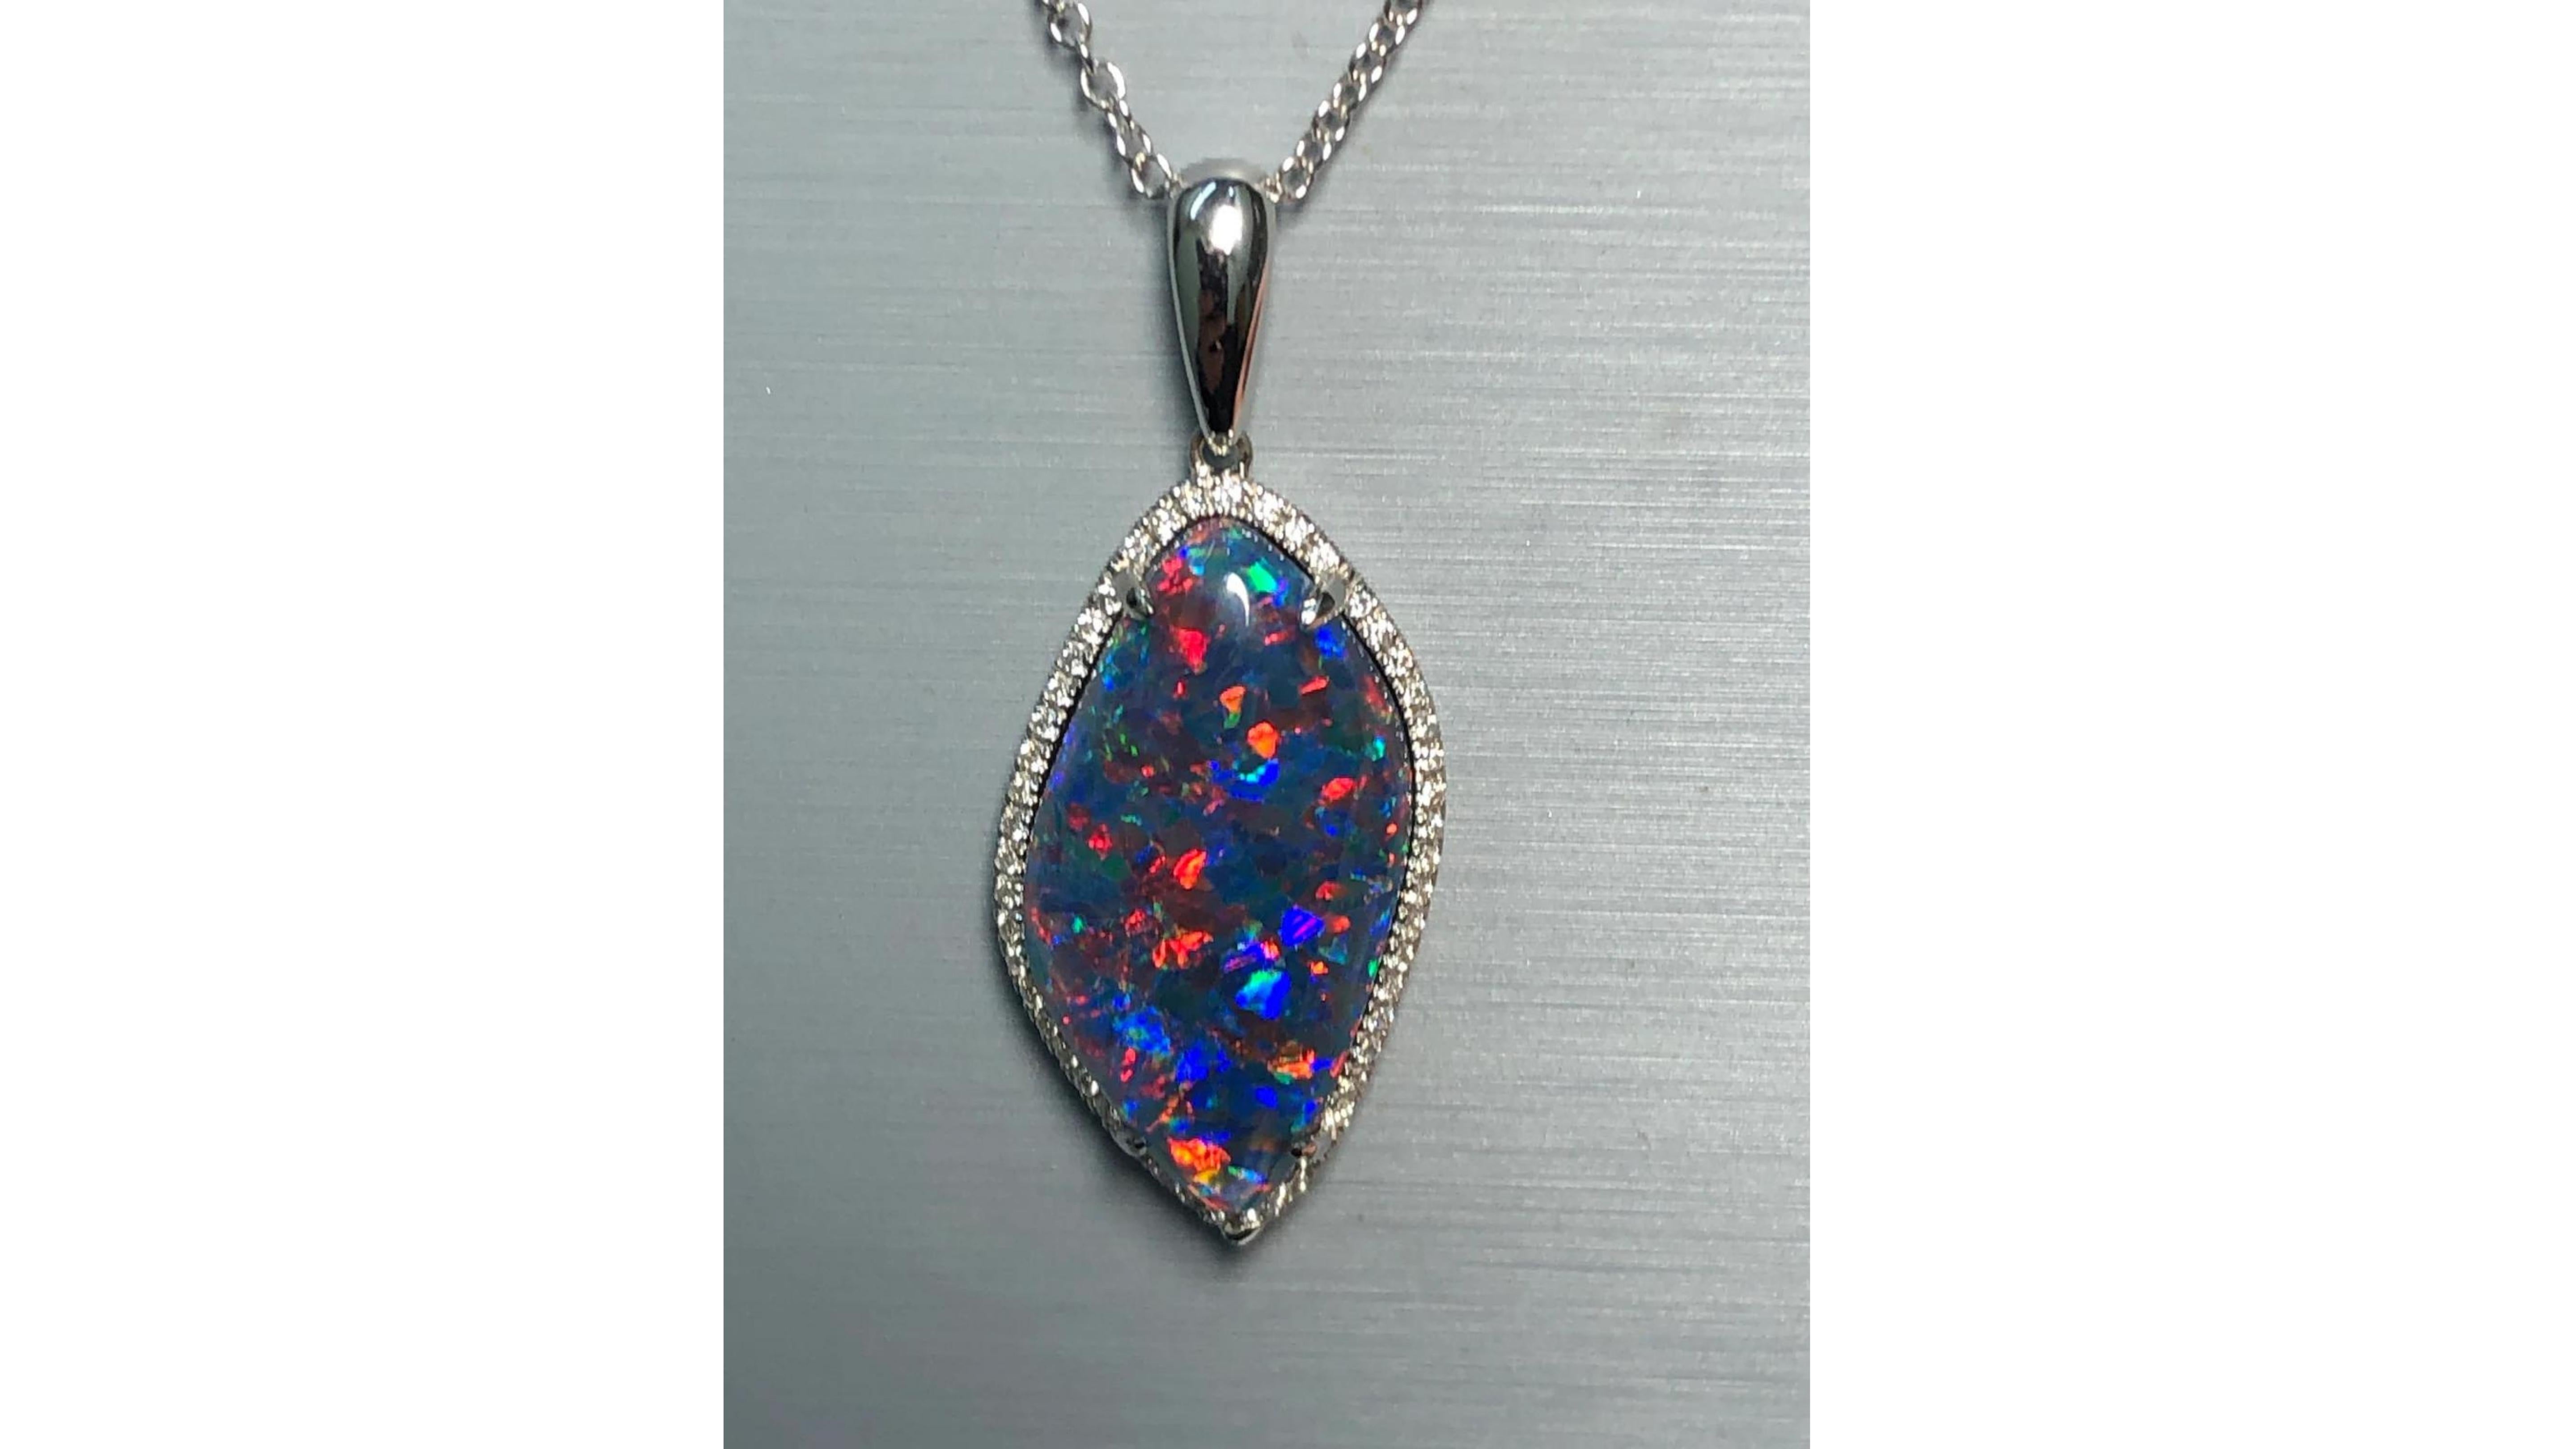 
Black Australian Opal Diamond Necklace   . This is with 48 White Diamonds set in 18 Karat White Gold and really does stand out.  The Opal Shows off very bright Colors Blue Green Yellow Orange Red which is a rare color to find.  This is as black